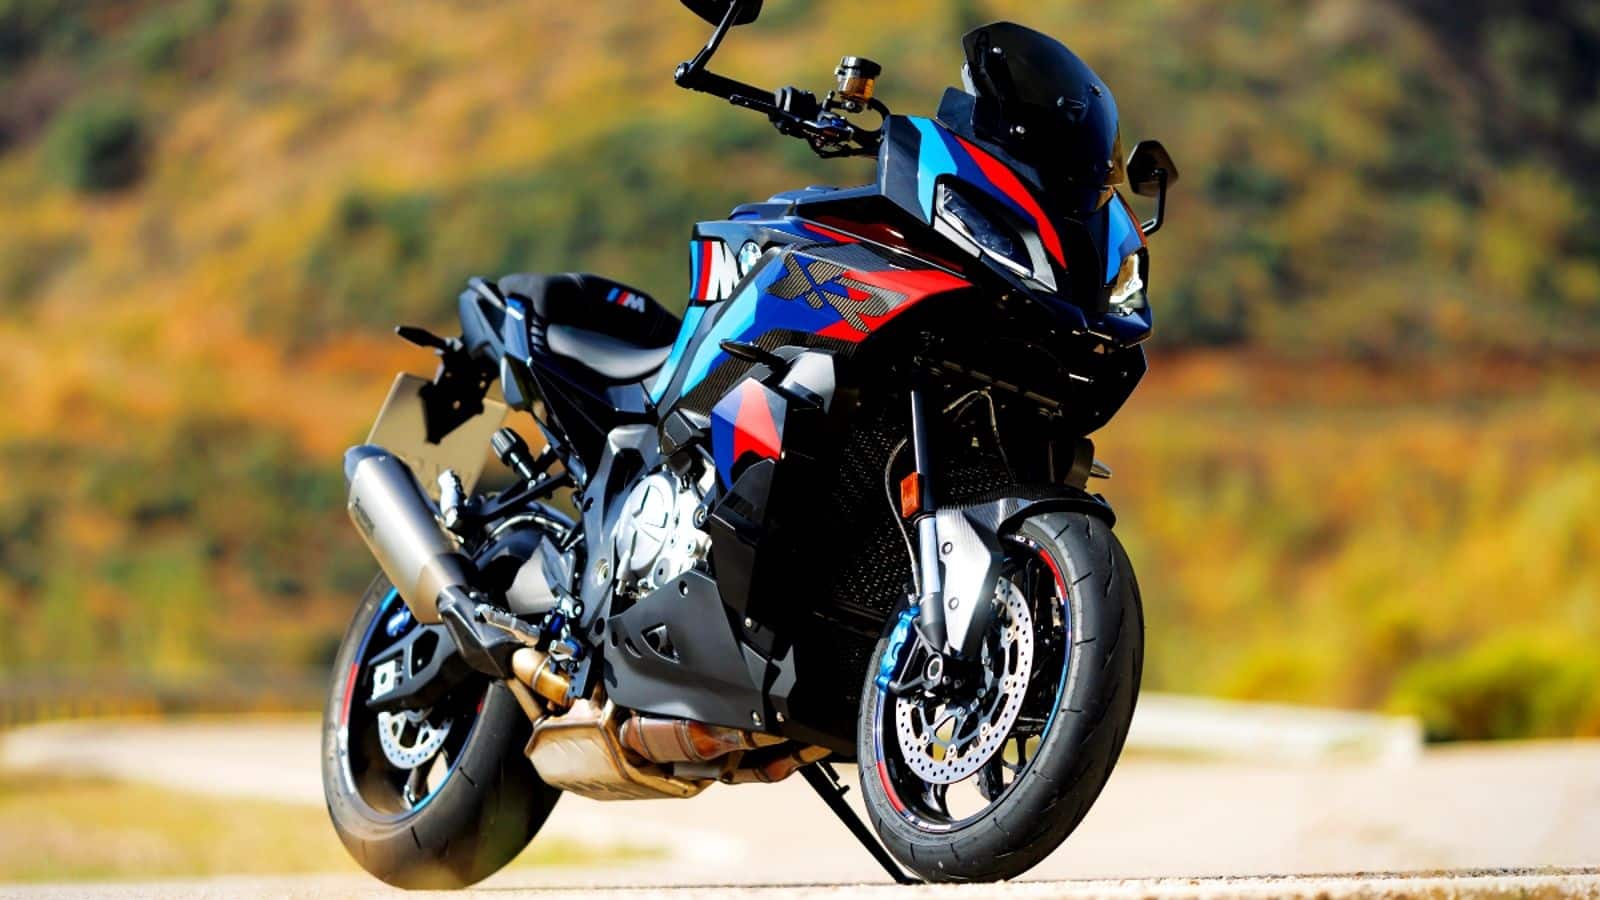 BMW launches world's most powerful crossover motorcycle at ₹45 lakh